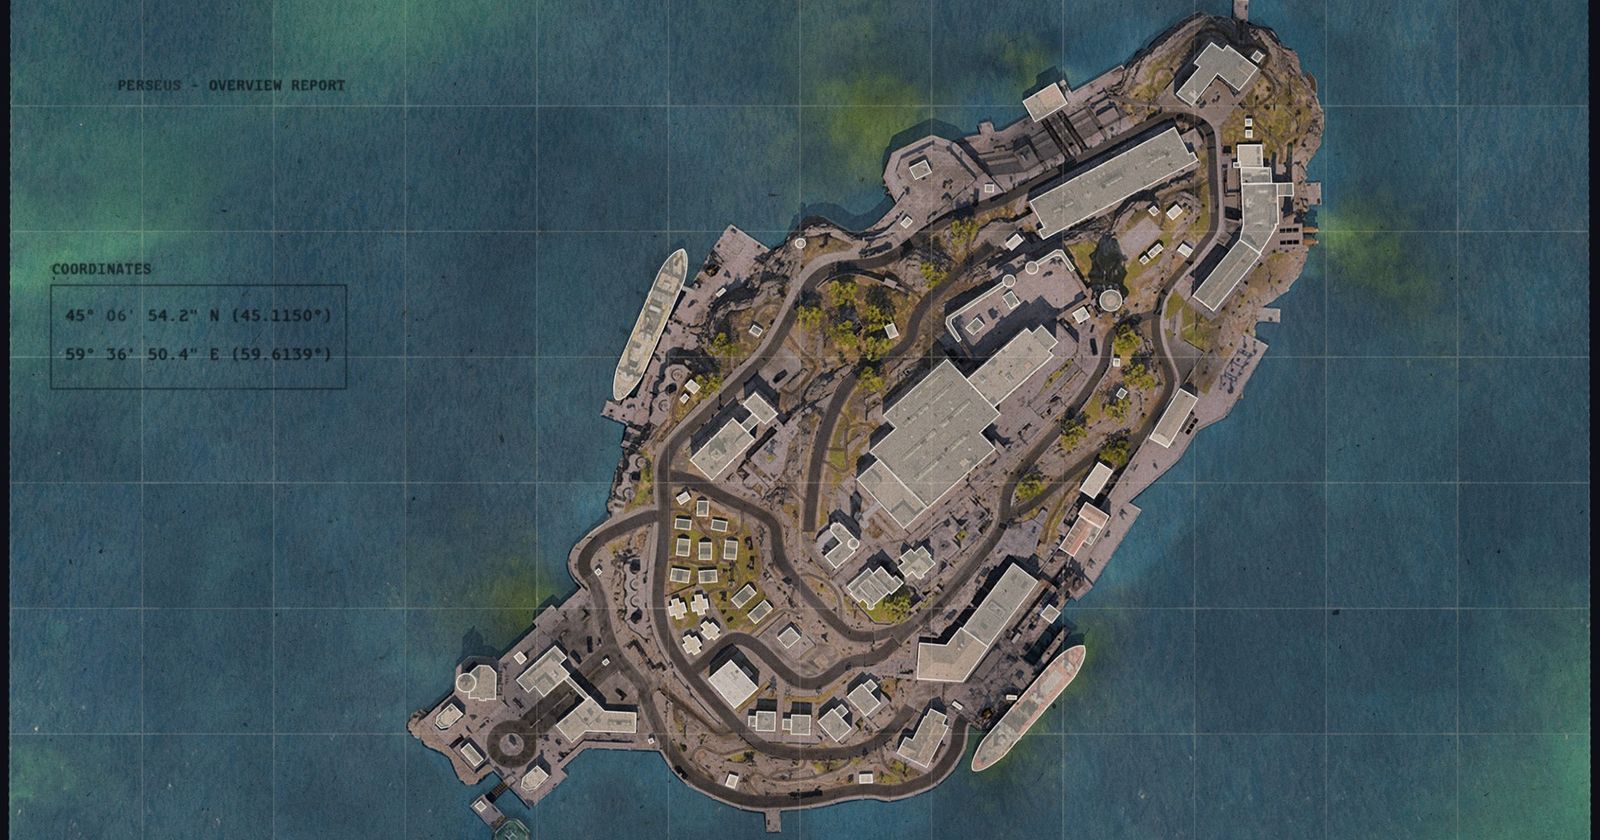 Call of Duty: Warzone: First Image Of Rebirth Island Revealed